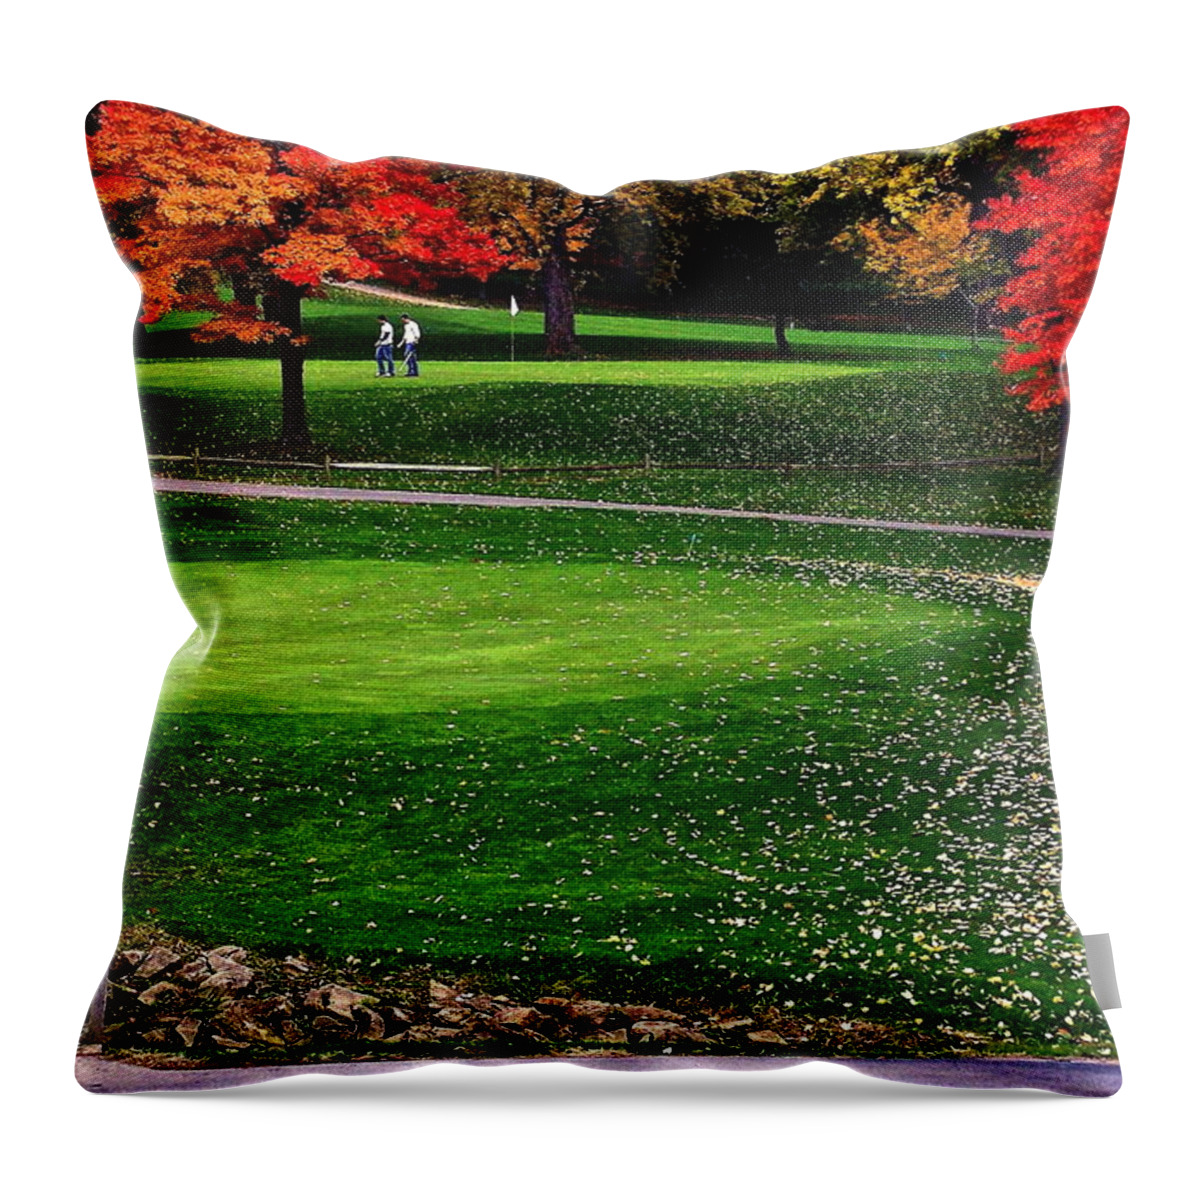 Friends Throw Pillow featuring the photograph Friends #2 by Frozen in Time Fine Art Photography